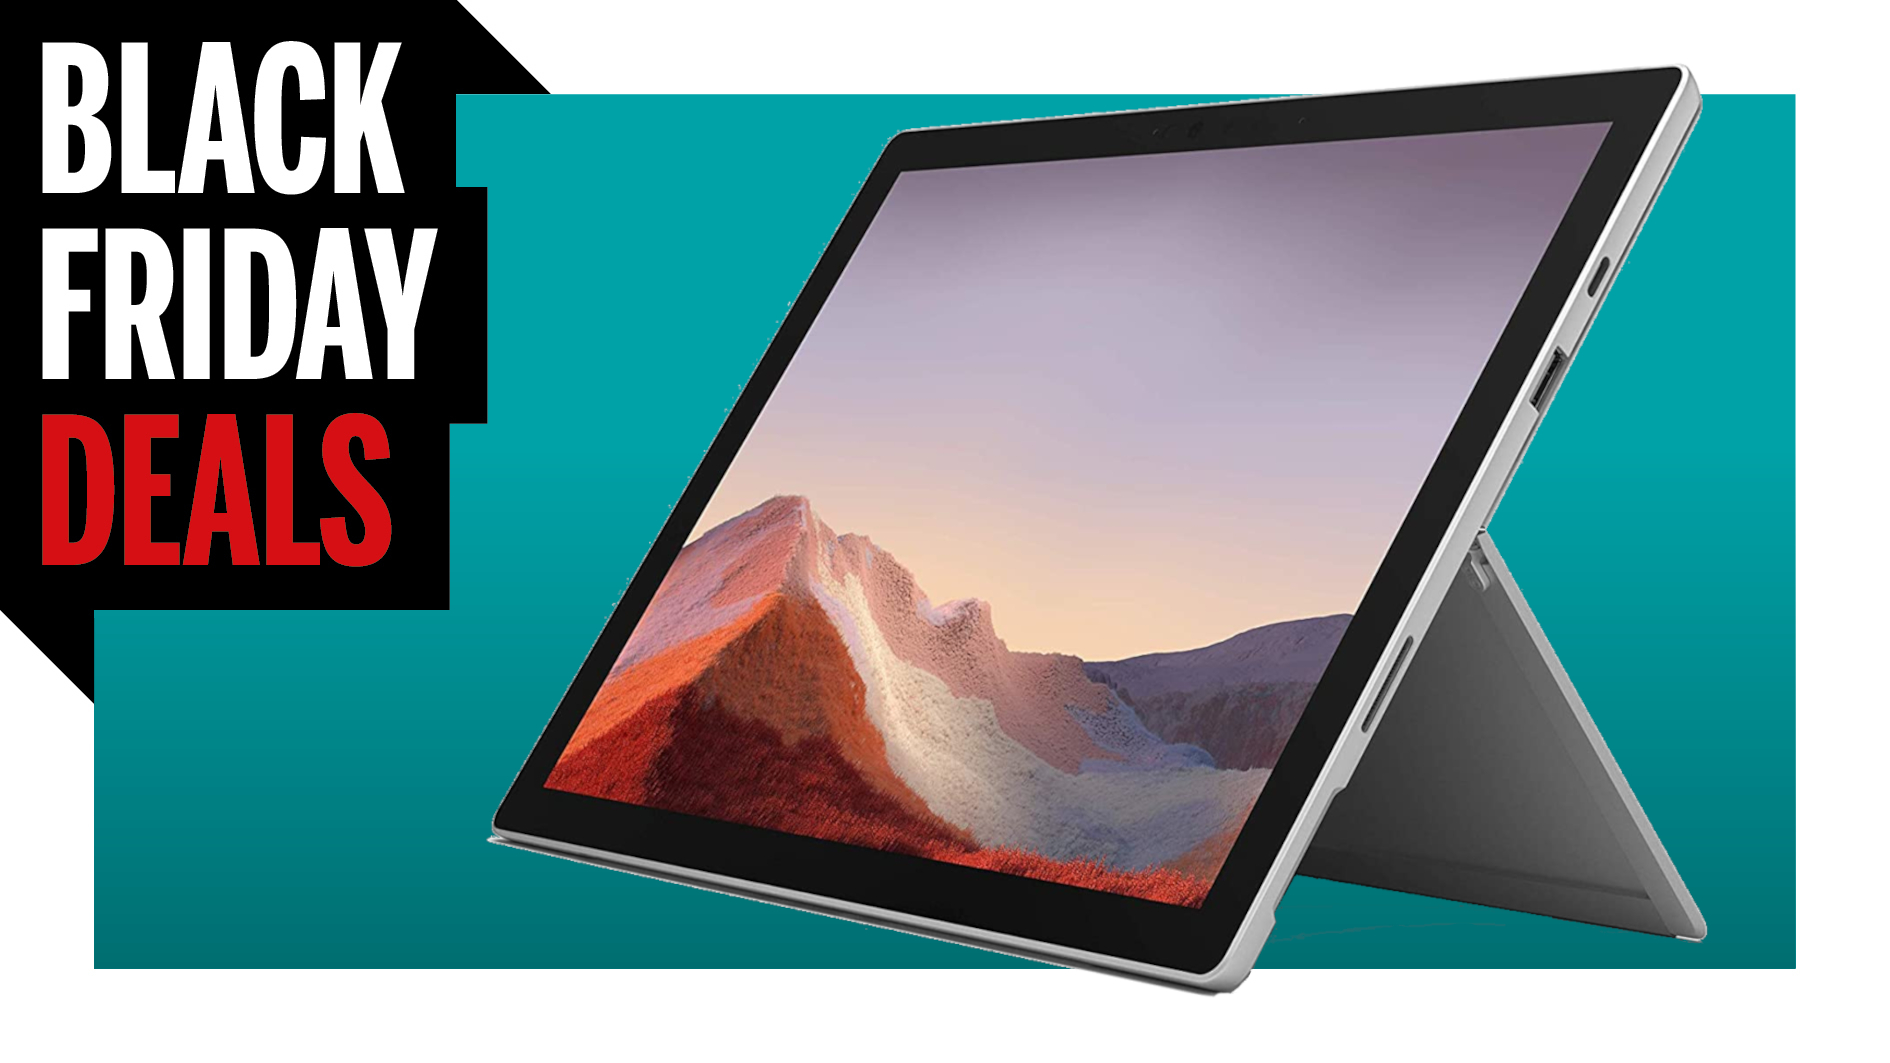  Get a Microsoft Surface Pro 7 for only $599 